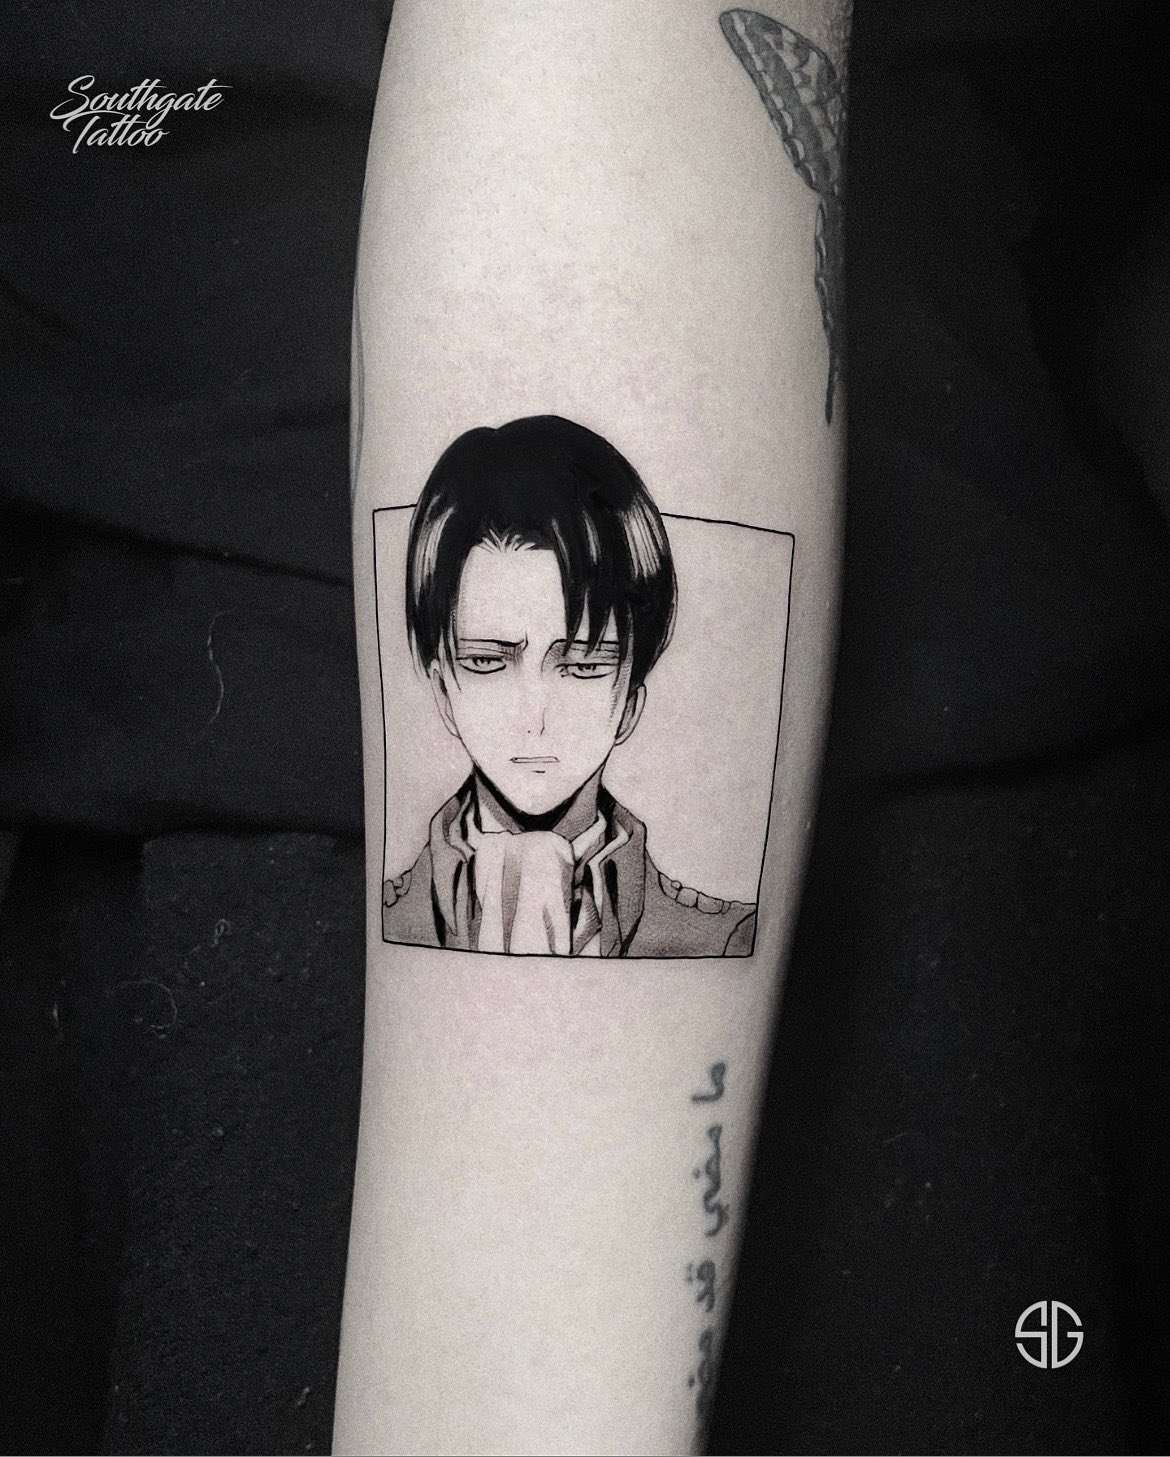 Southgate SG Tattoo  Piercing Studio on Twitter  Levi Ackerman  anime  character from attackontitan perfected by our resident oscrtttst  Booksinfo in our Bio southgatetattoo    leviackerman  leviackermantattoo attackontitan 